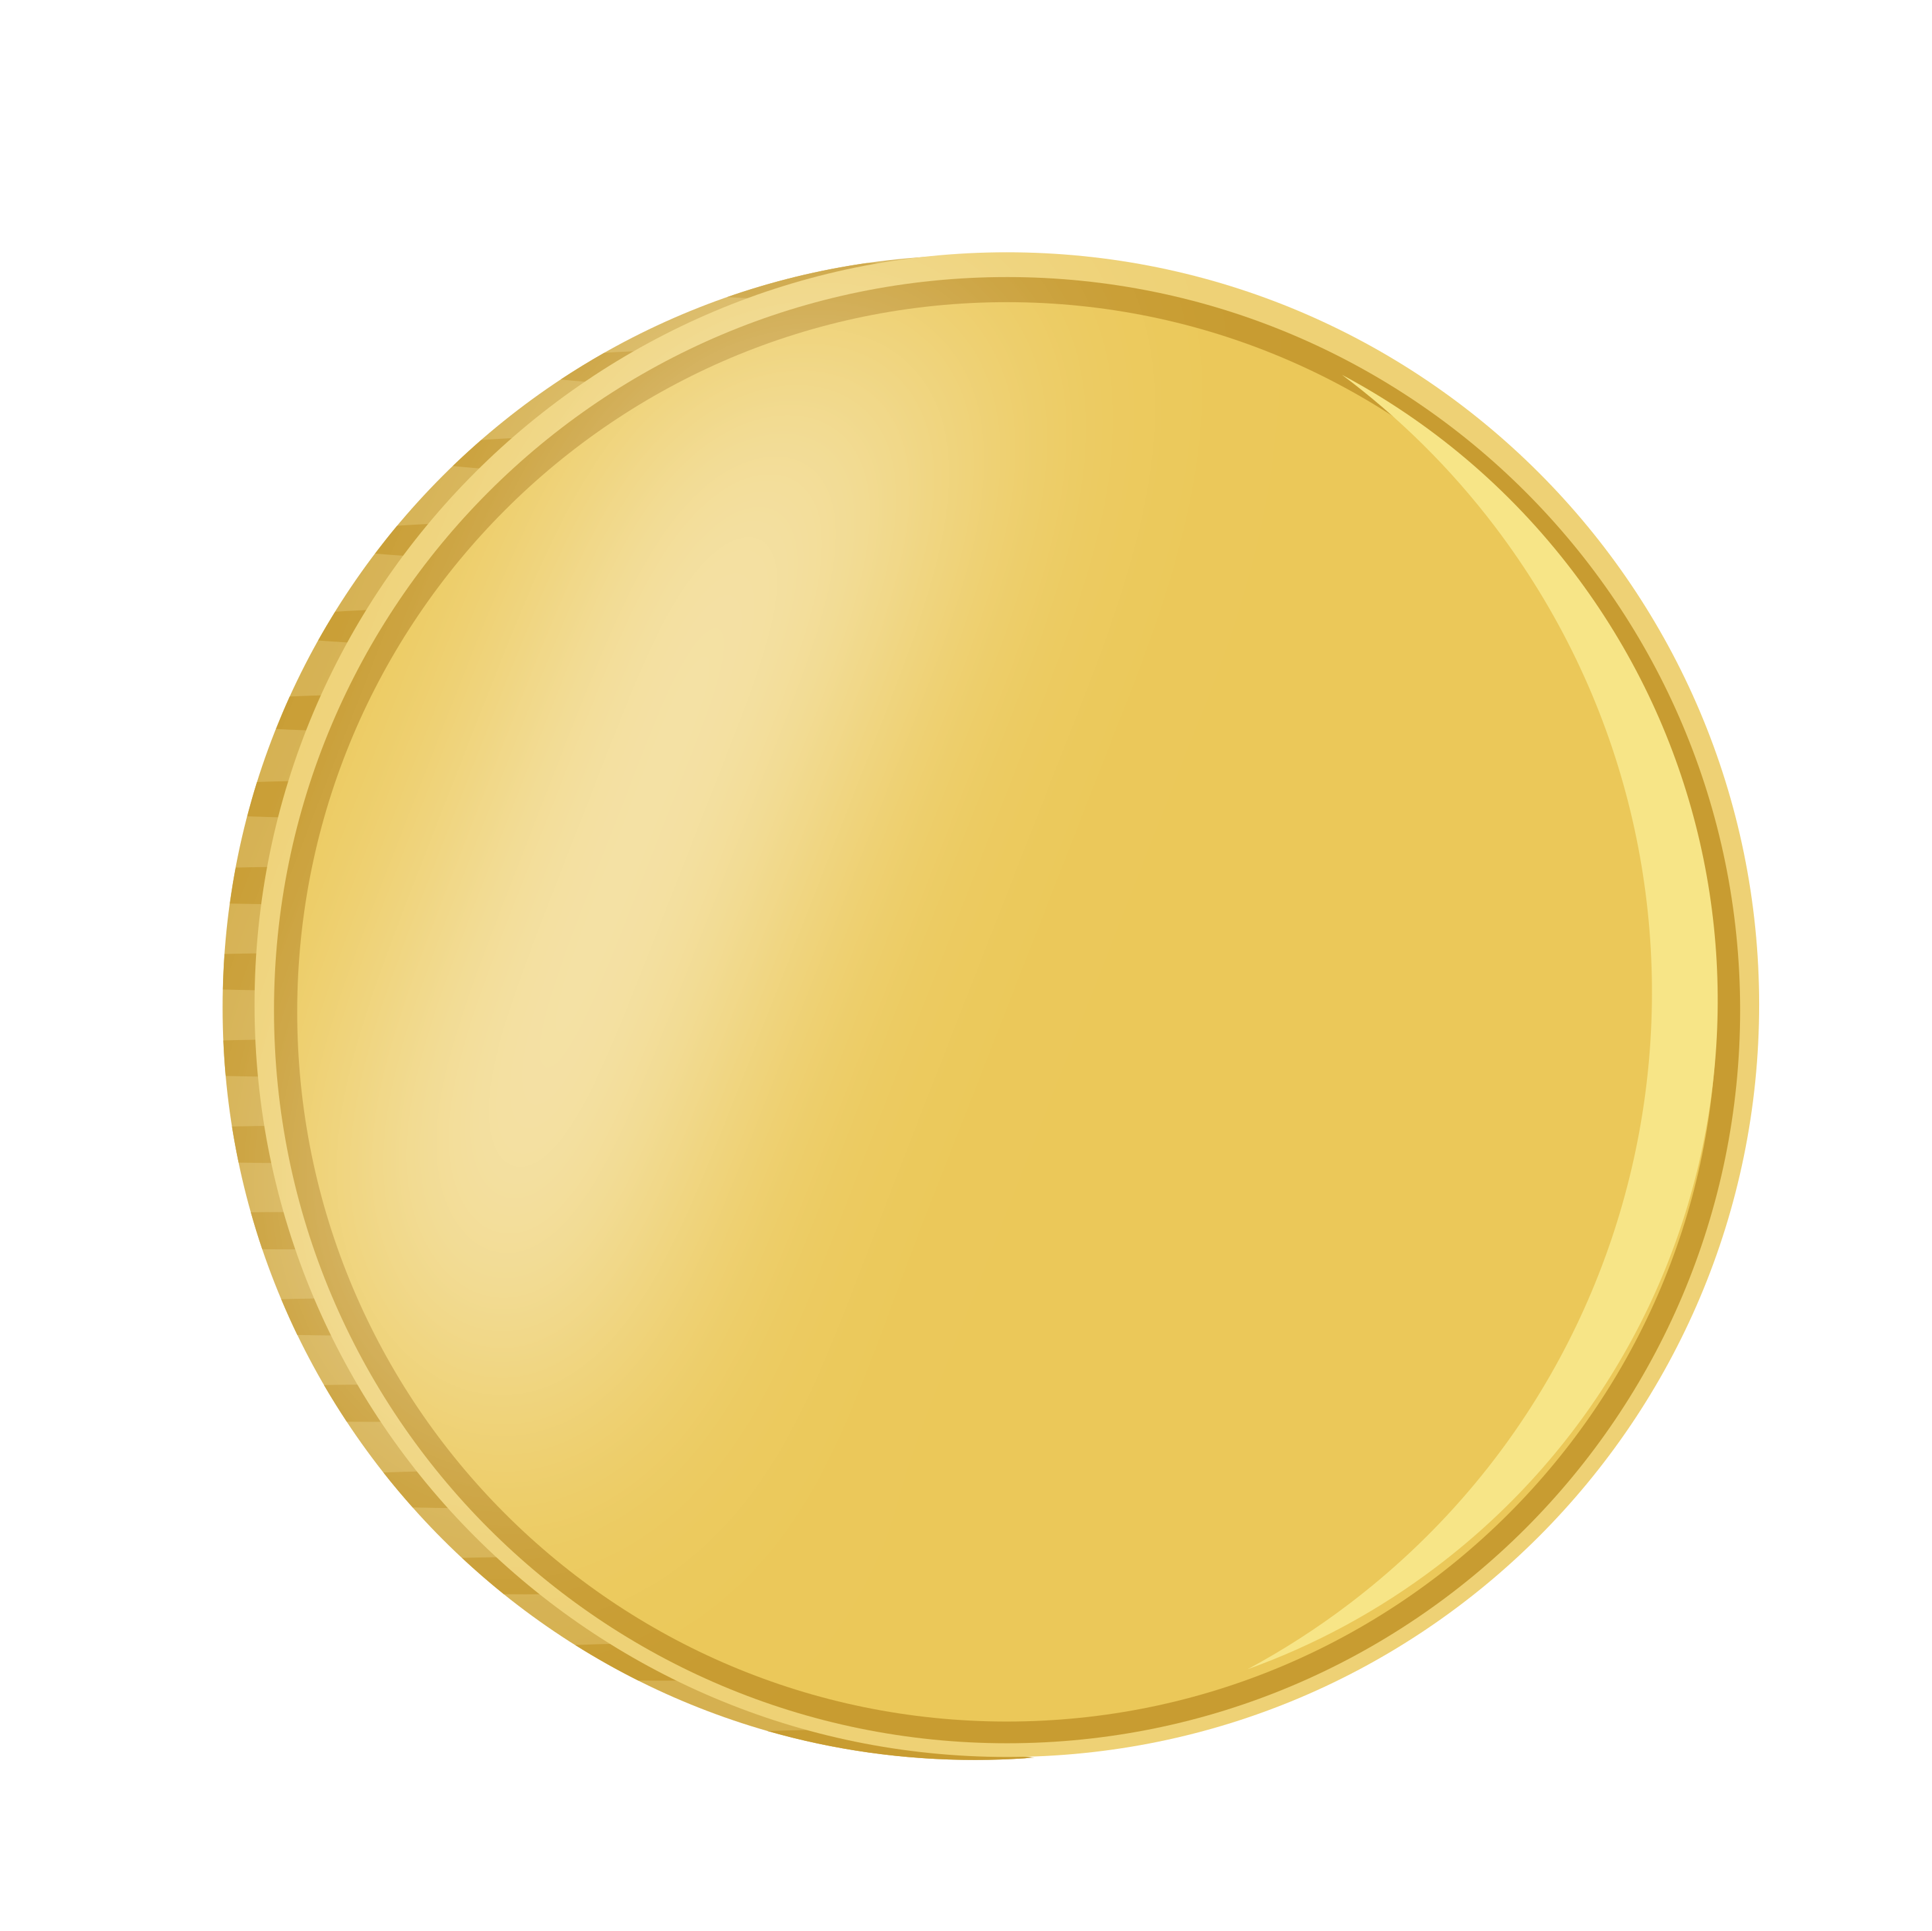 Coin PNG Image in High Definition - Coin Png